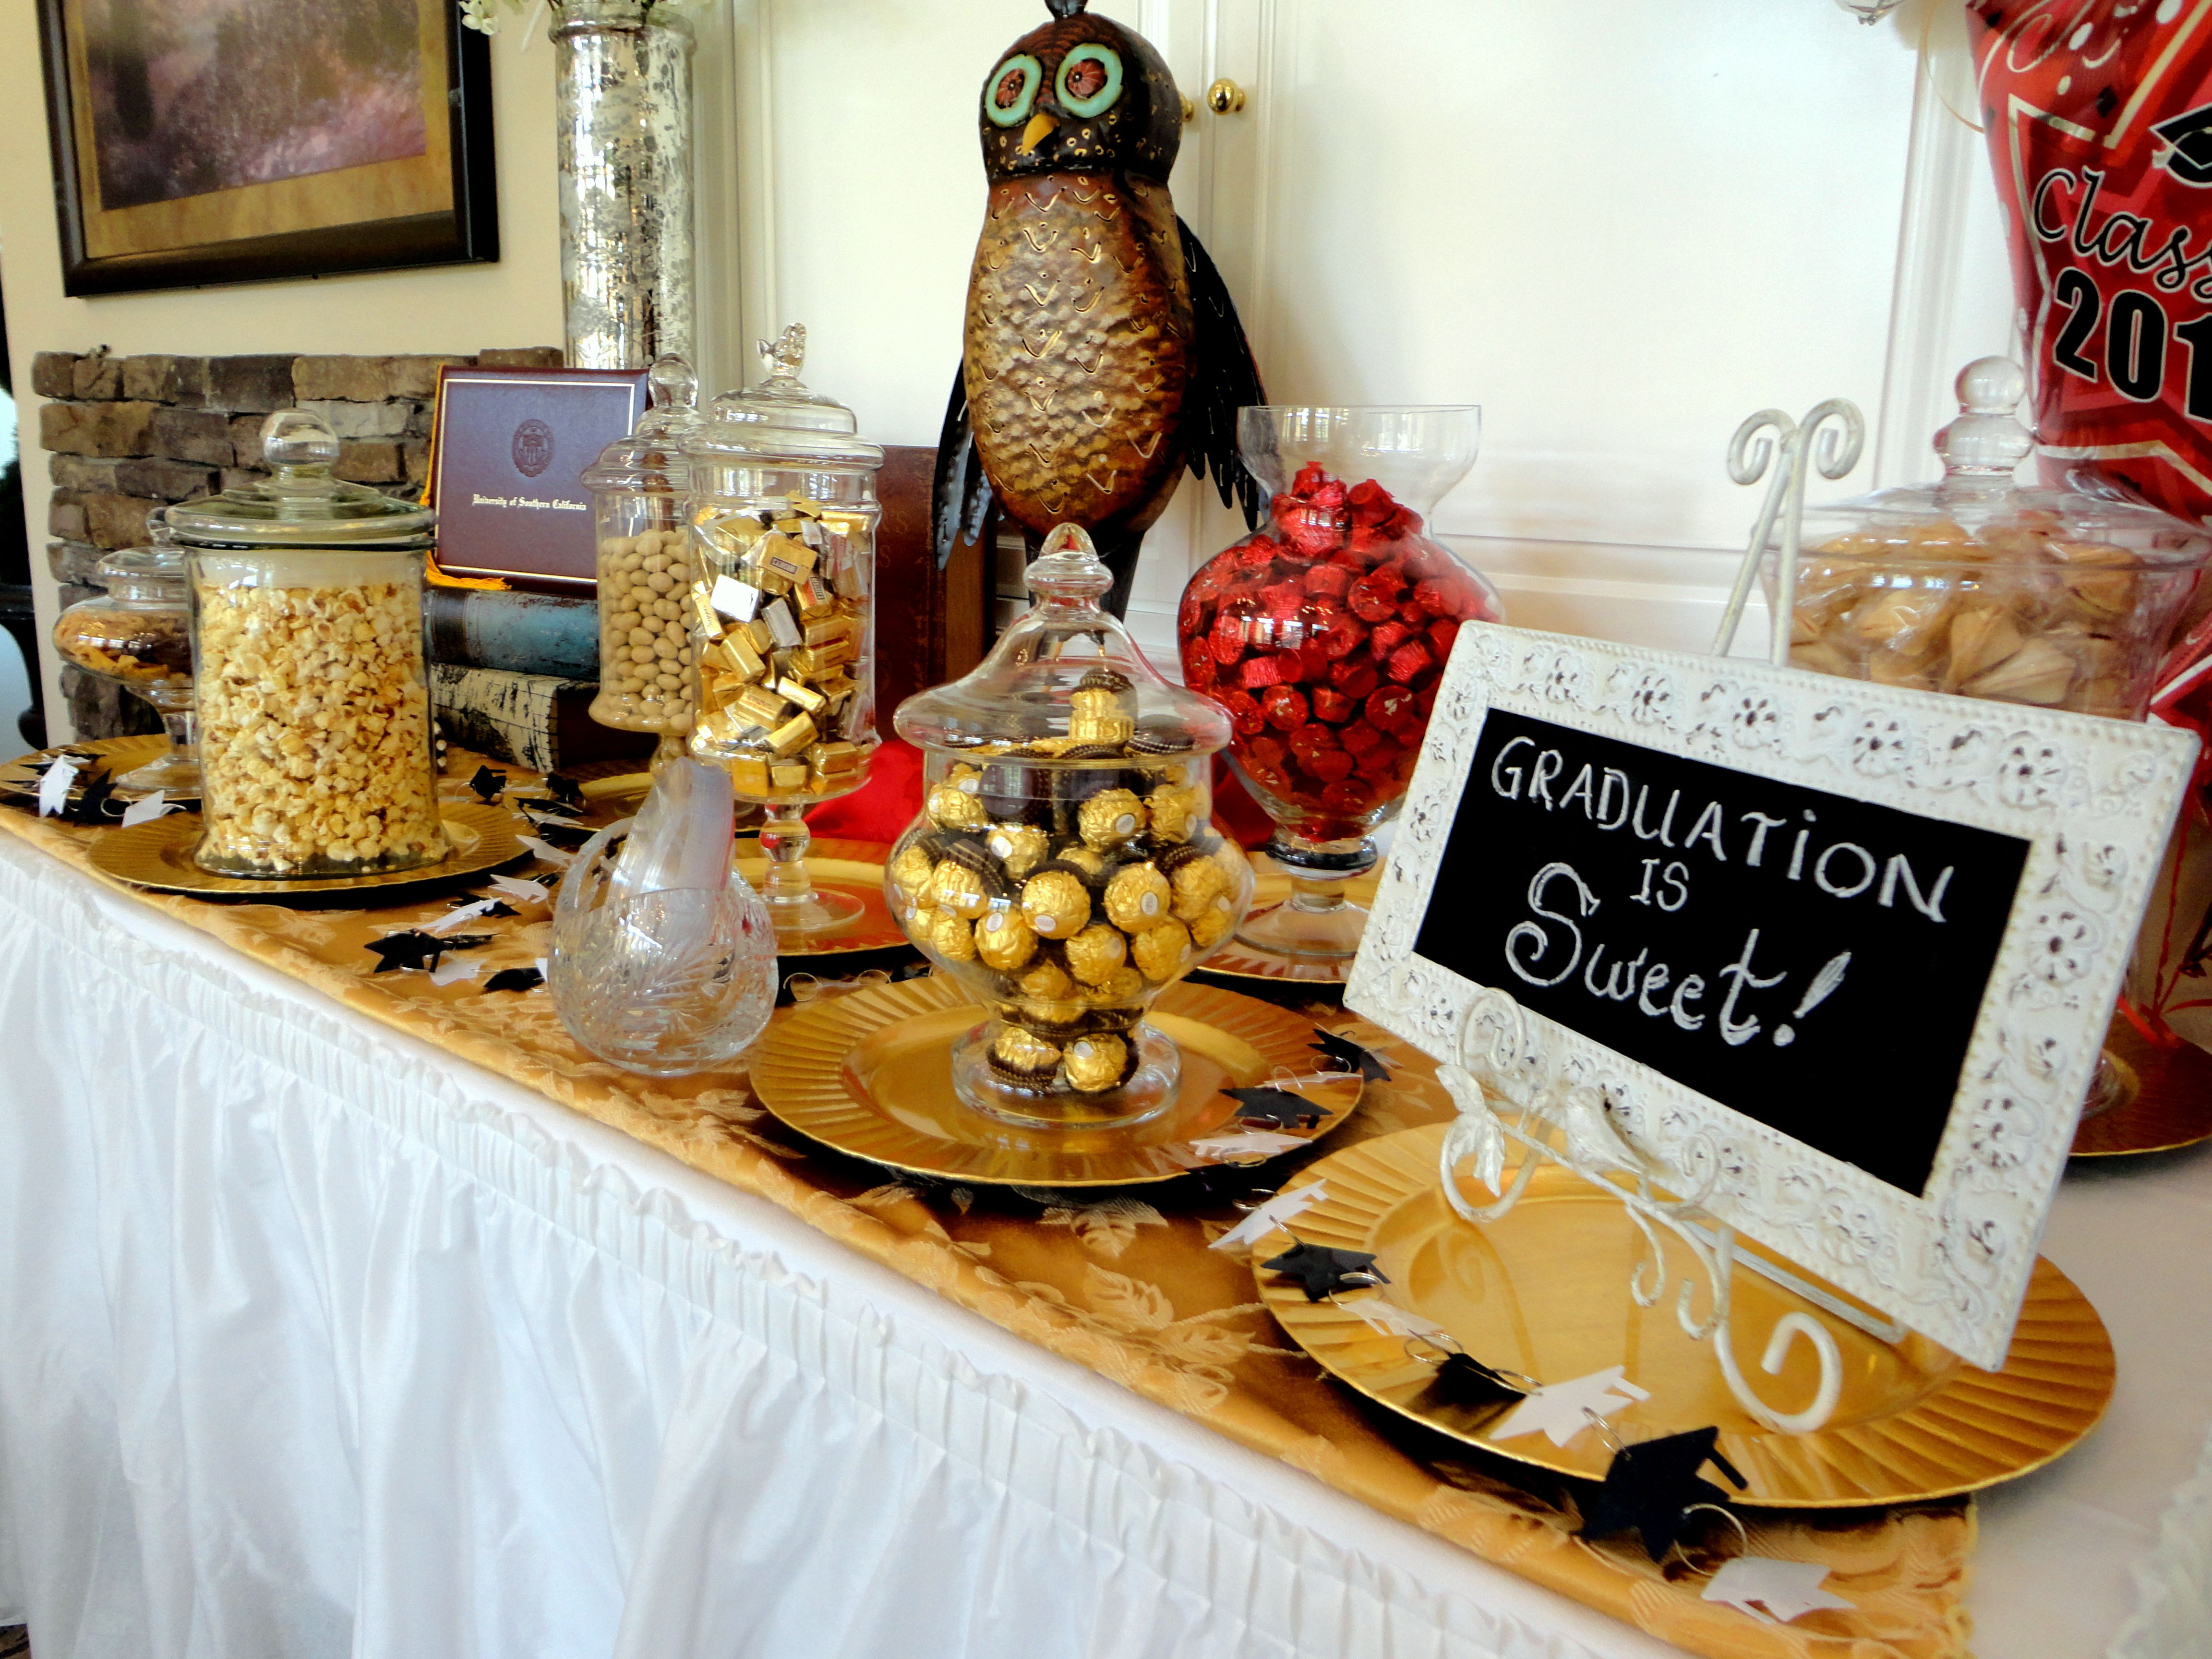 Graduation Party Candy Table Ideas
 Dessert table my mother created for my USC graduation